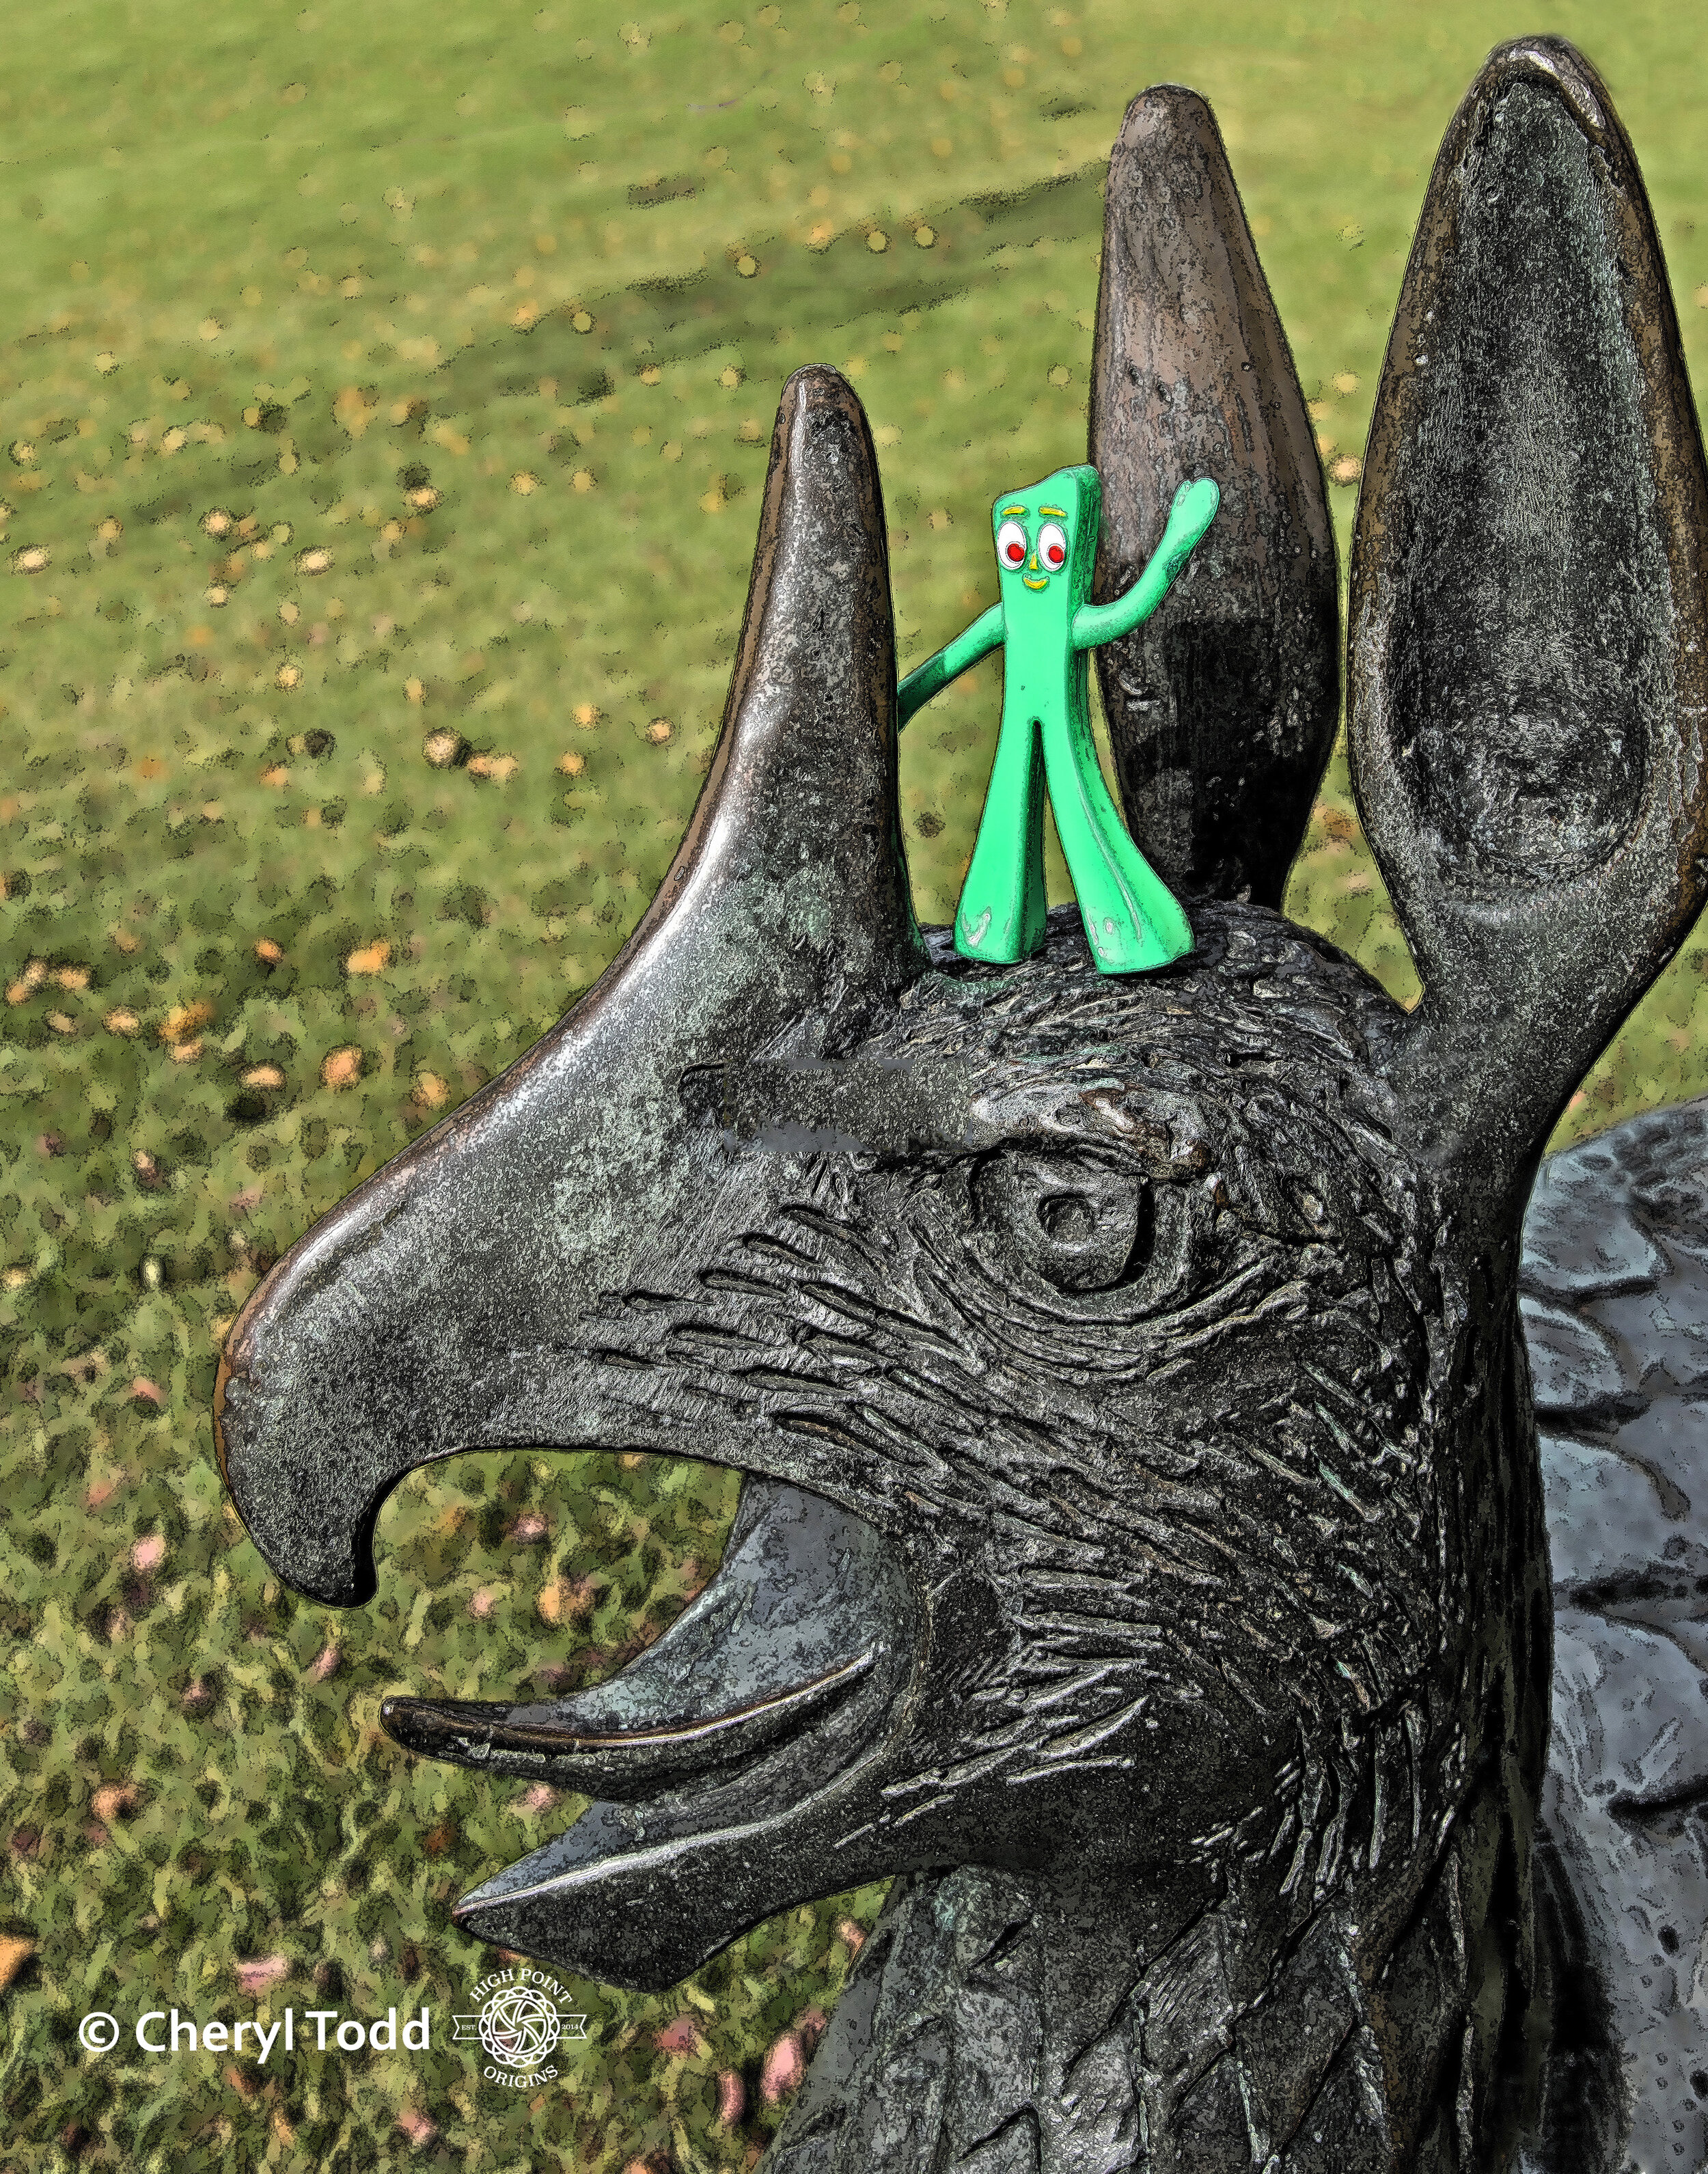 2016-12-9 Gumby and the Griffin 11x14.jpg